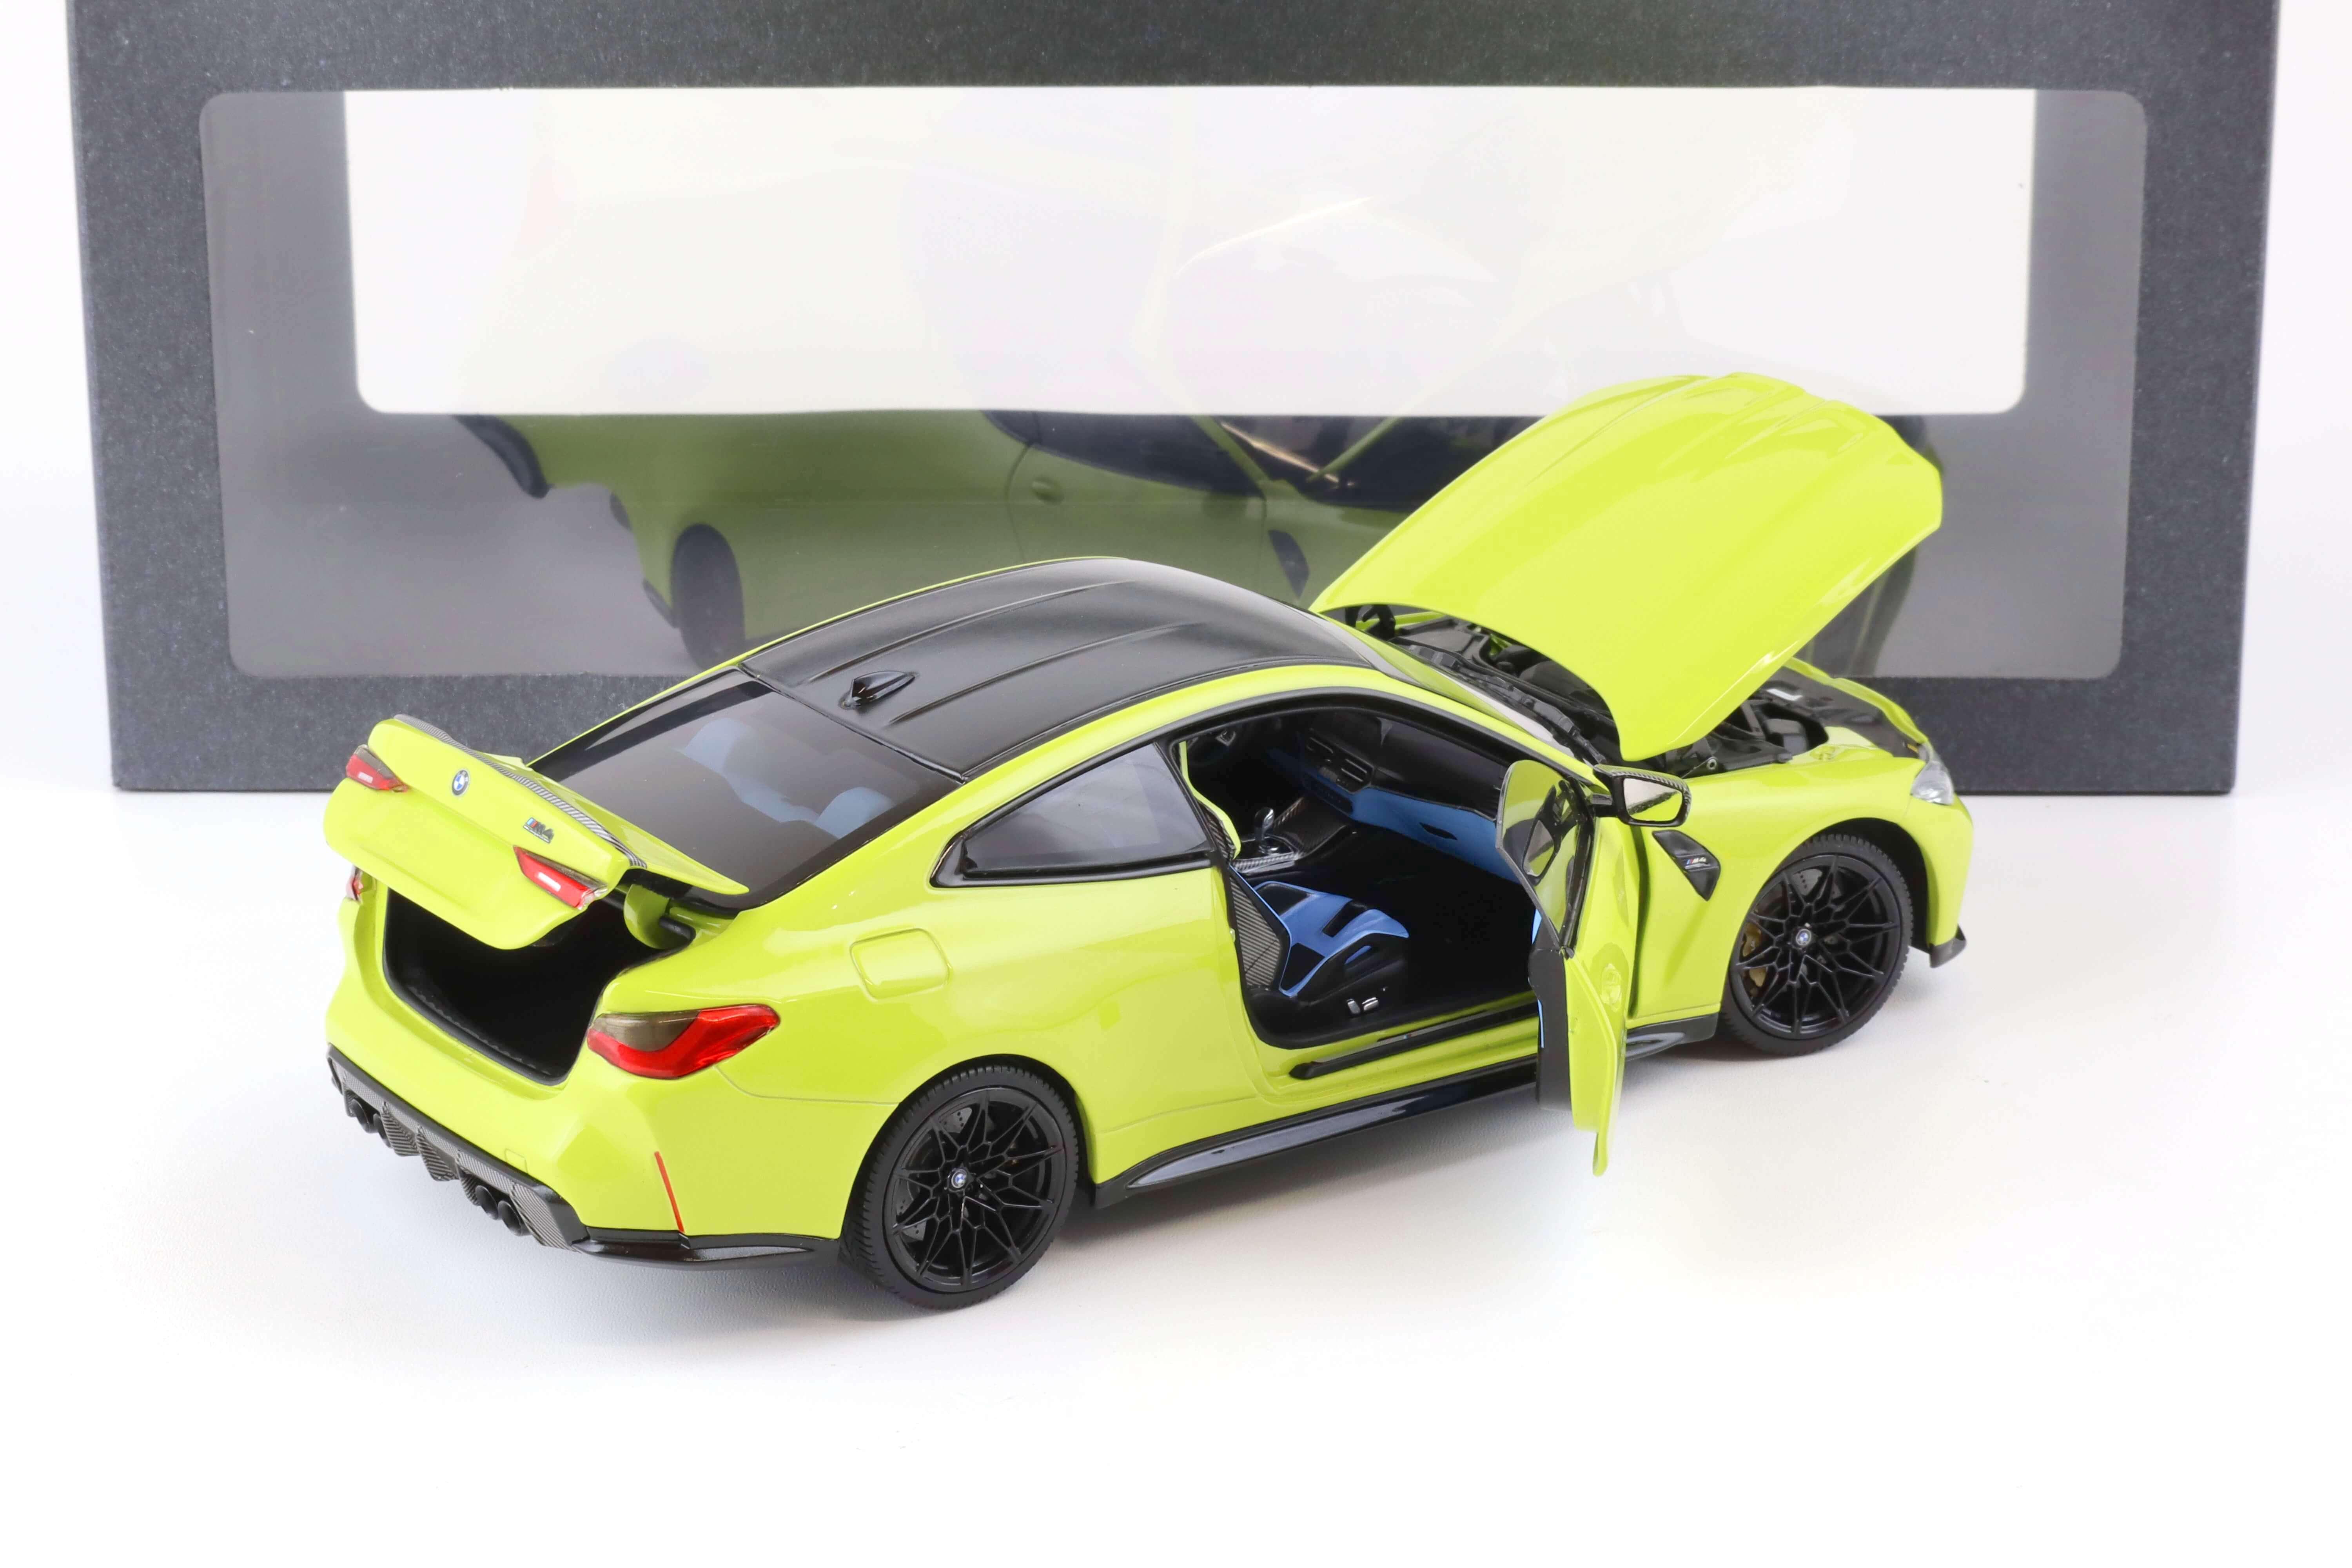 1:18 Minichamps BMW M4 (G82) Coupe 2020 Sao Paolo yellow DEALER VERSION